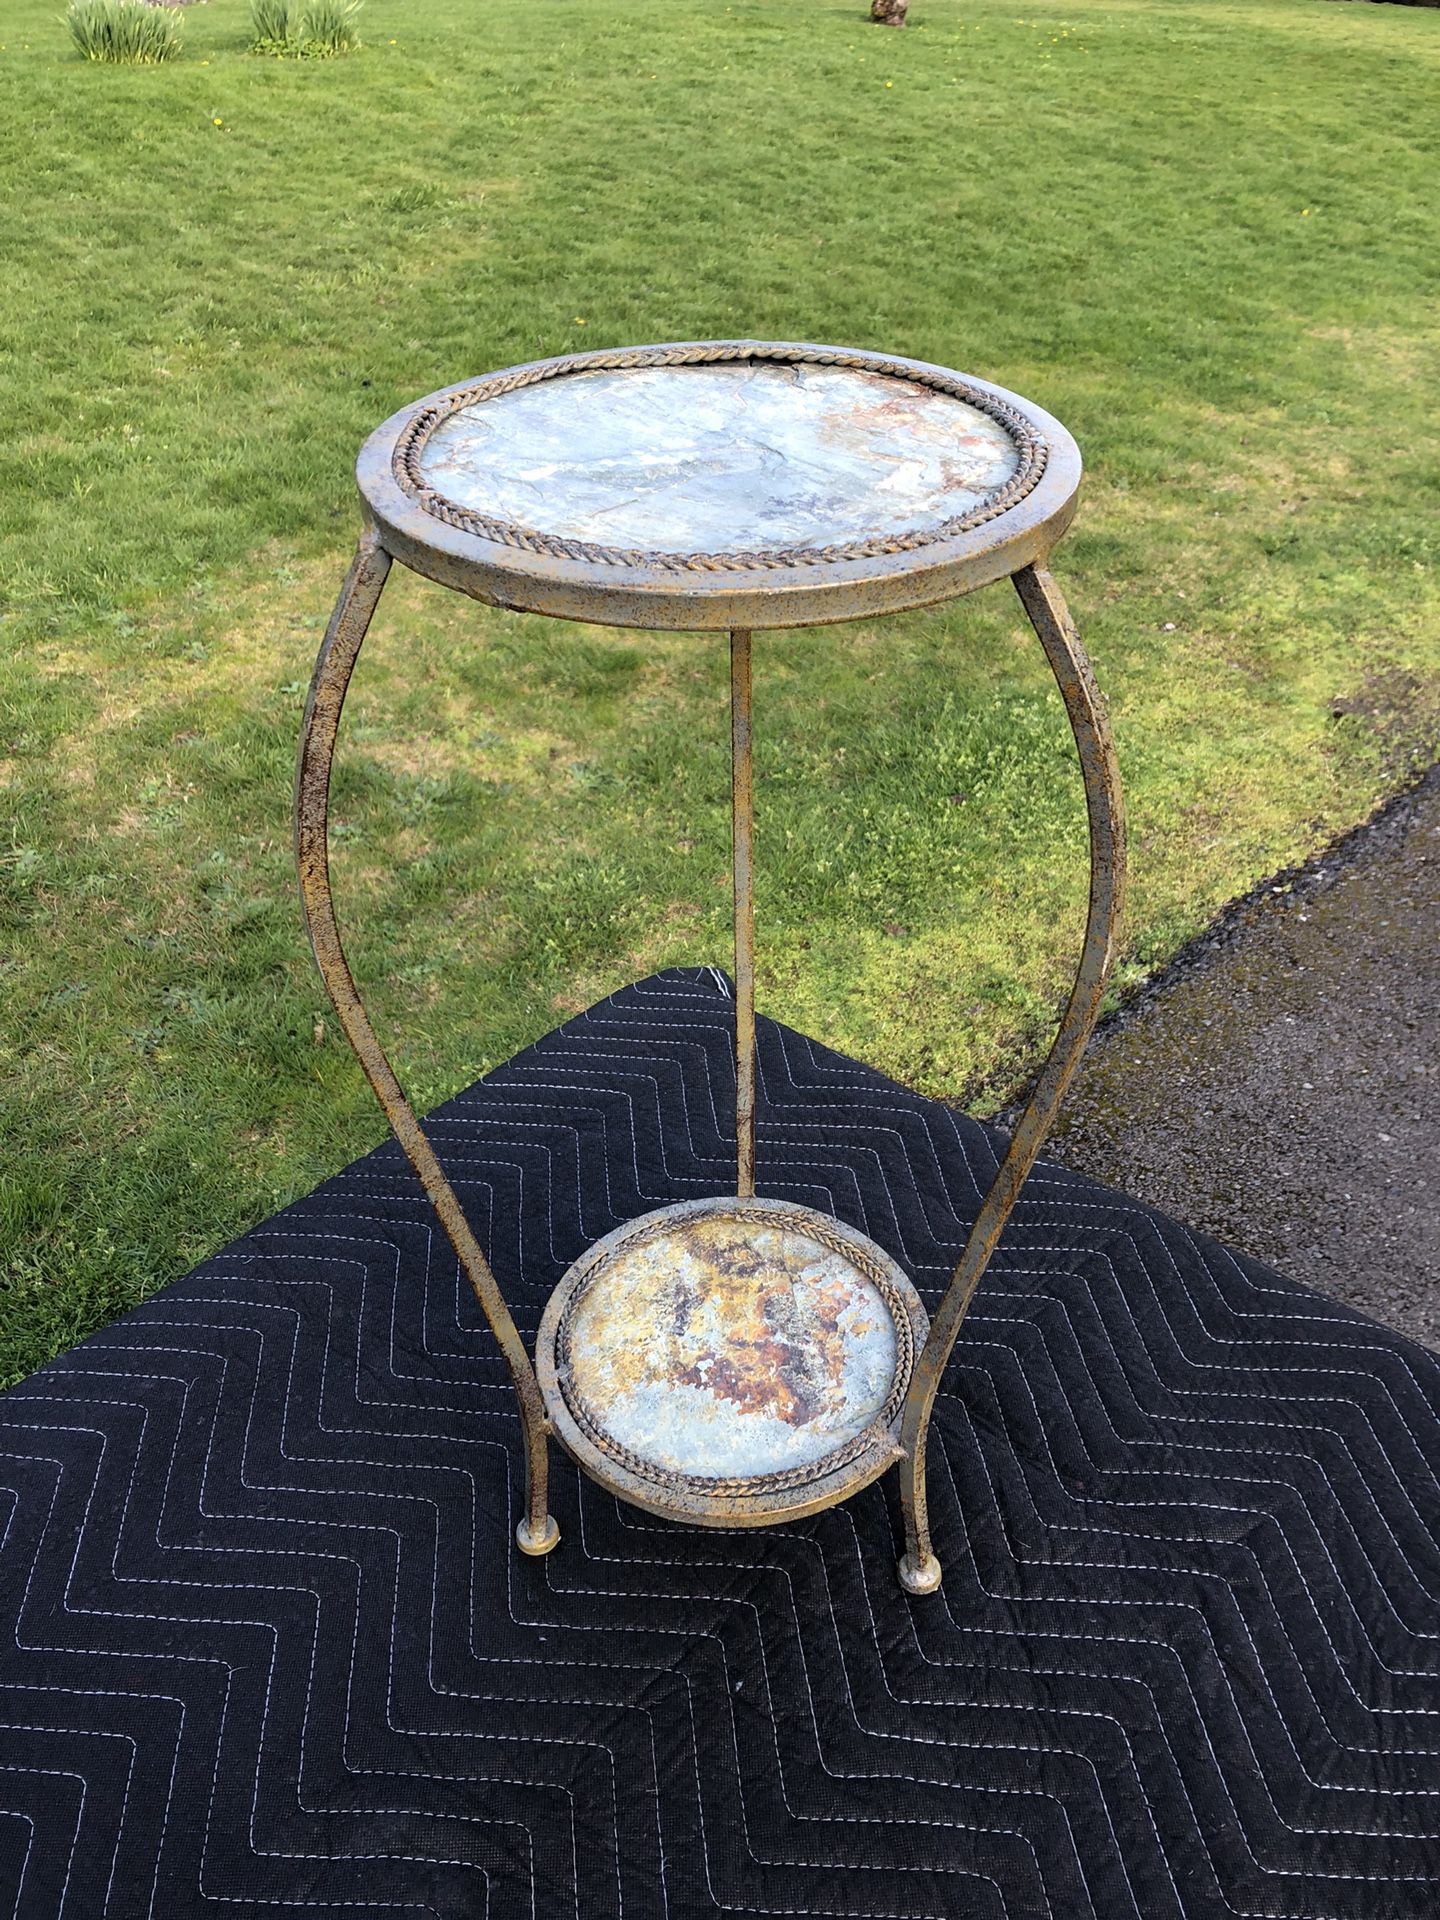 Cool Artistic Metal And Stone Side Table!! Indoor Or Outdoor Use!! 